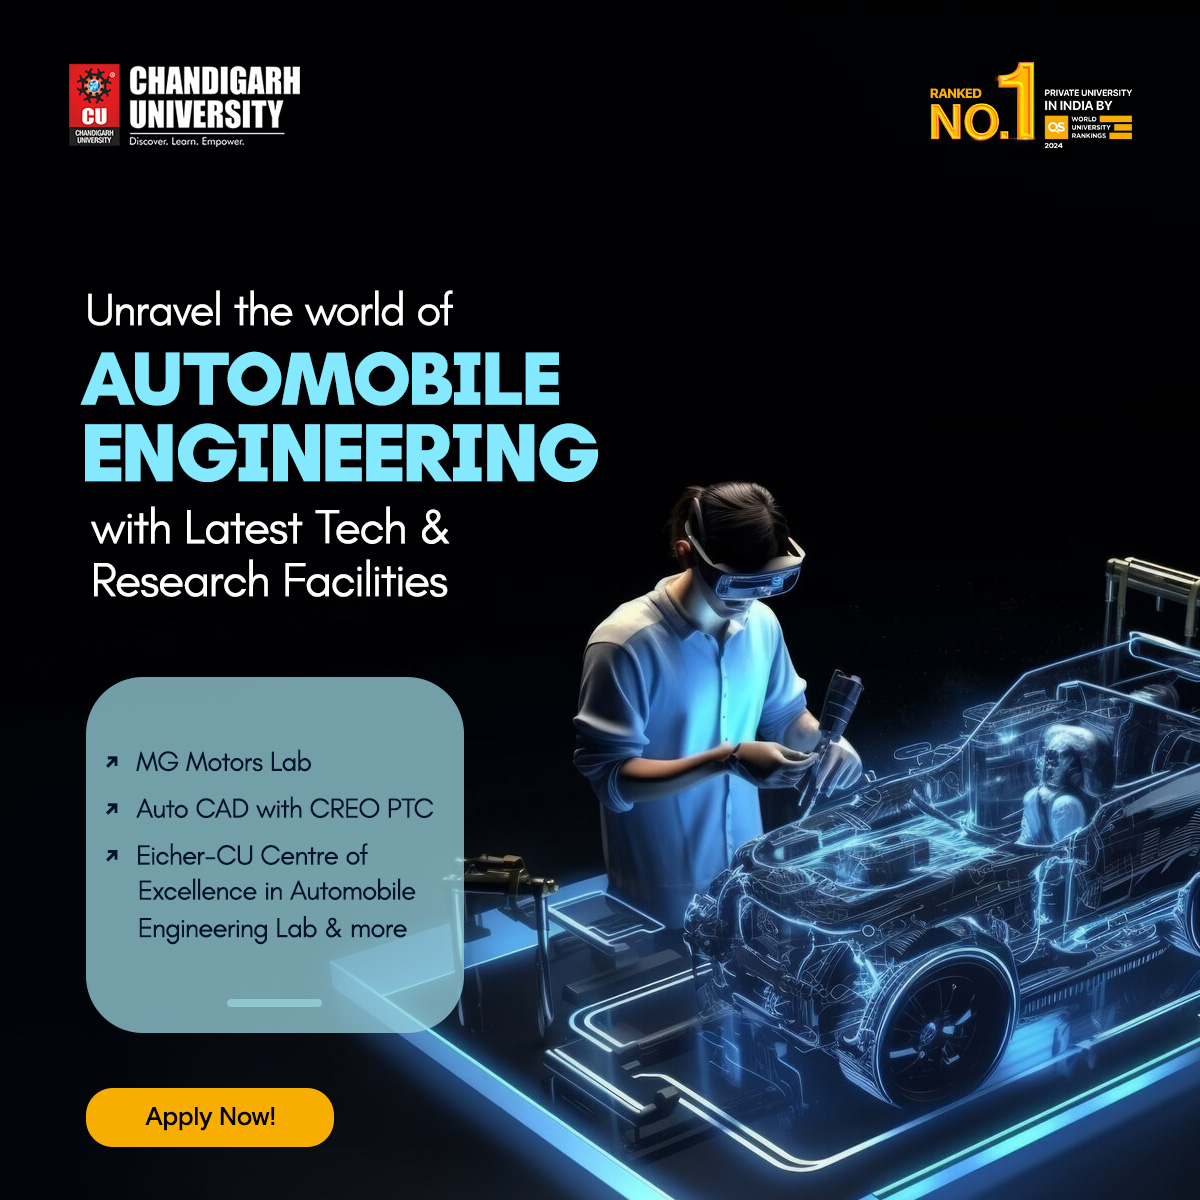 Discover the world of Automobile Engineering at Chandigarh University! 🚗🔧 Dive into latest tech with labs like the MG Motors Lab, Honda Research Centre, and more. Drive innovation and build your future! Apply now: cucet.cuchd.in #AutomobileEngineering